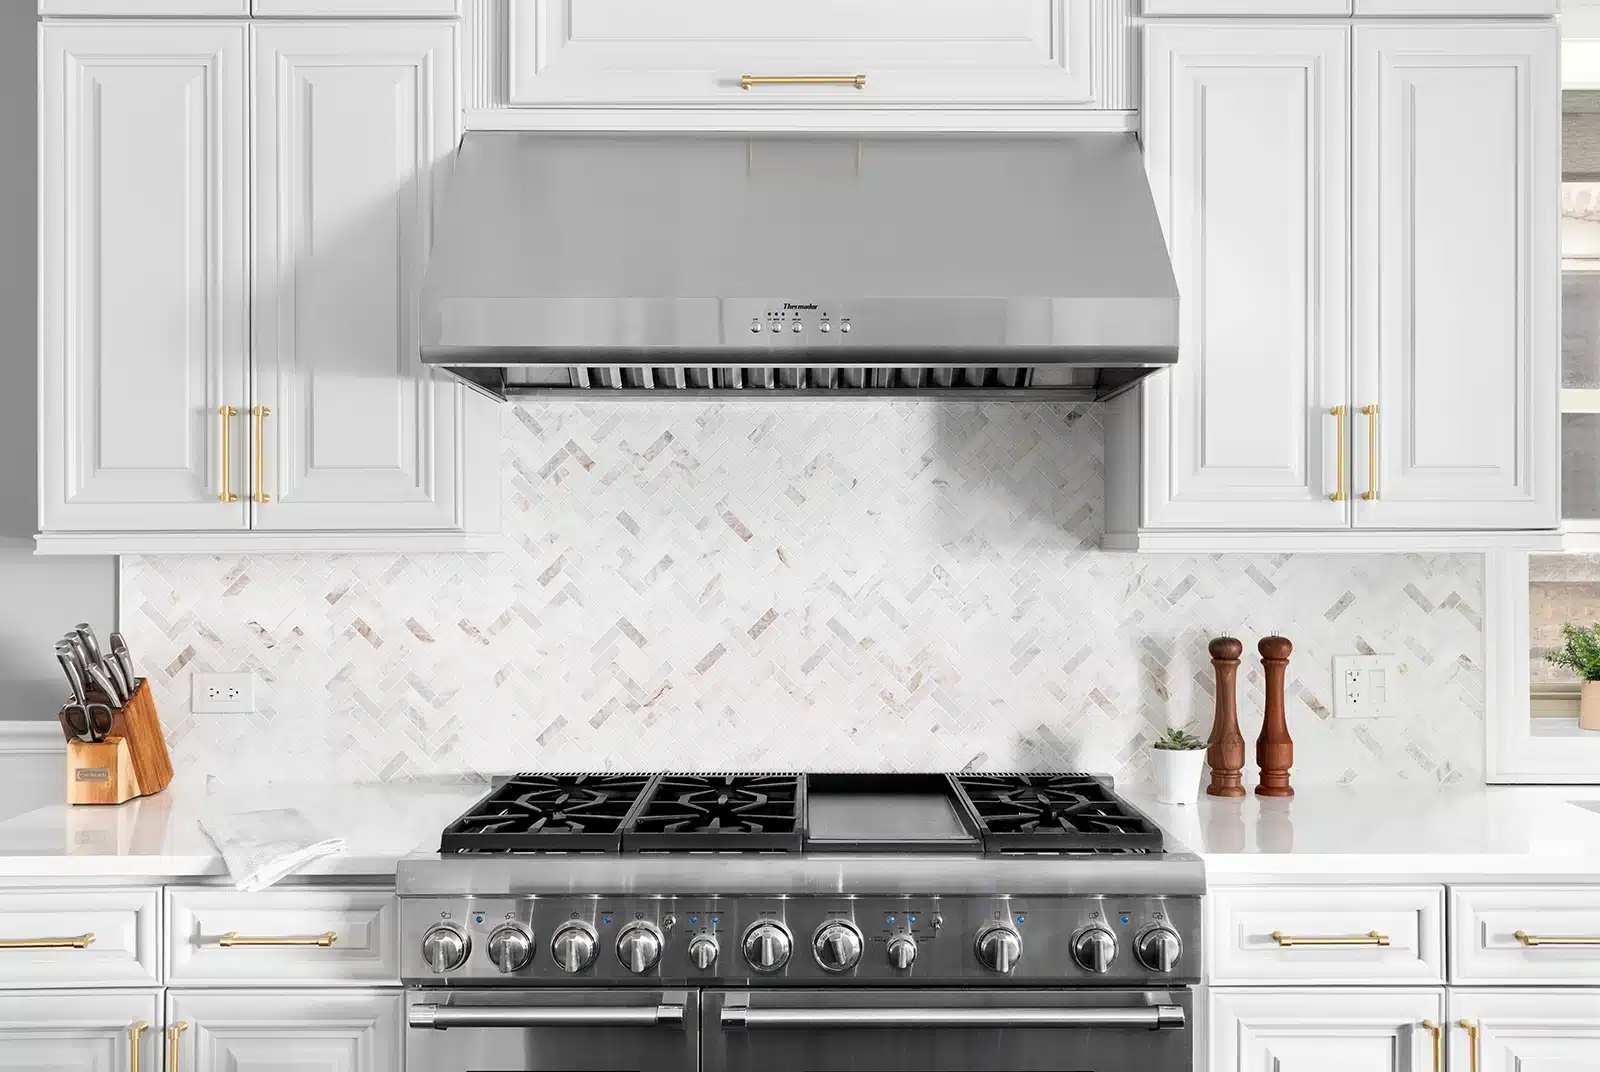 A modern gas stove in a white kitchen with a stainless steel range hood, elegant herringbone backsplash, and white marble countertops.